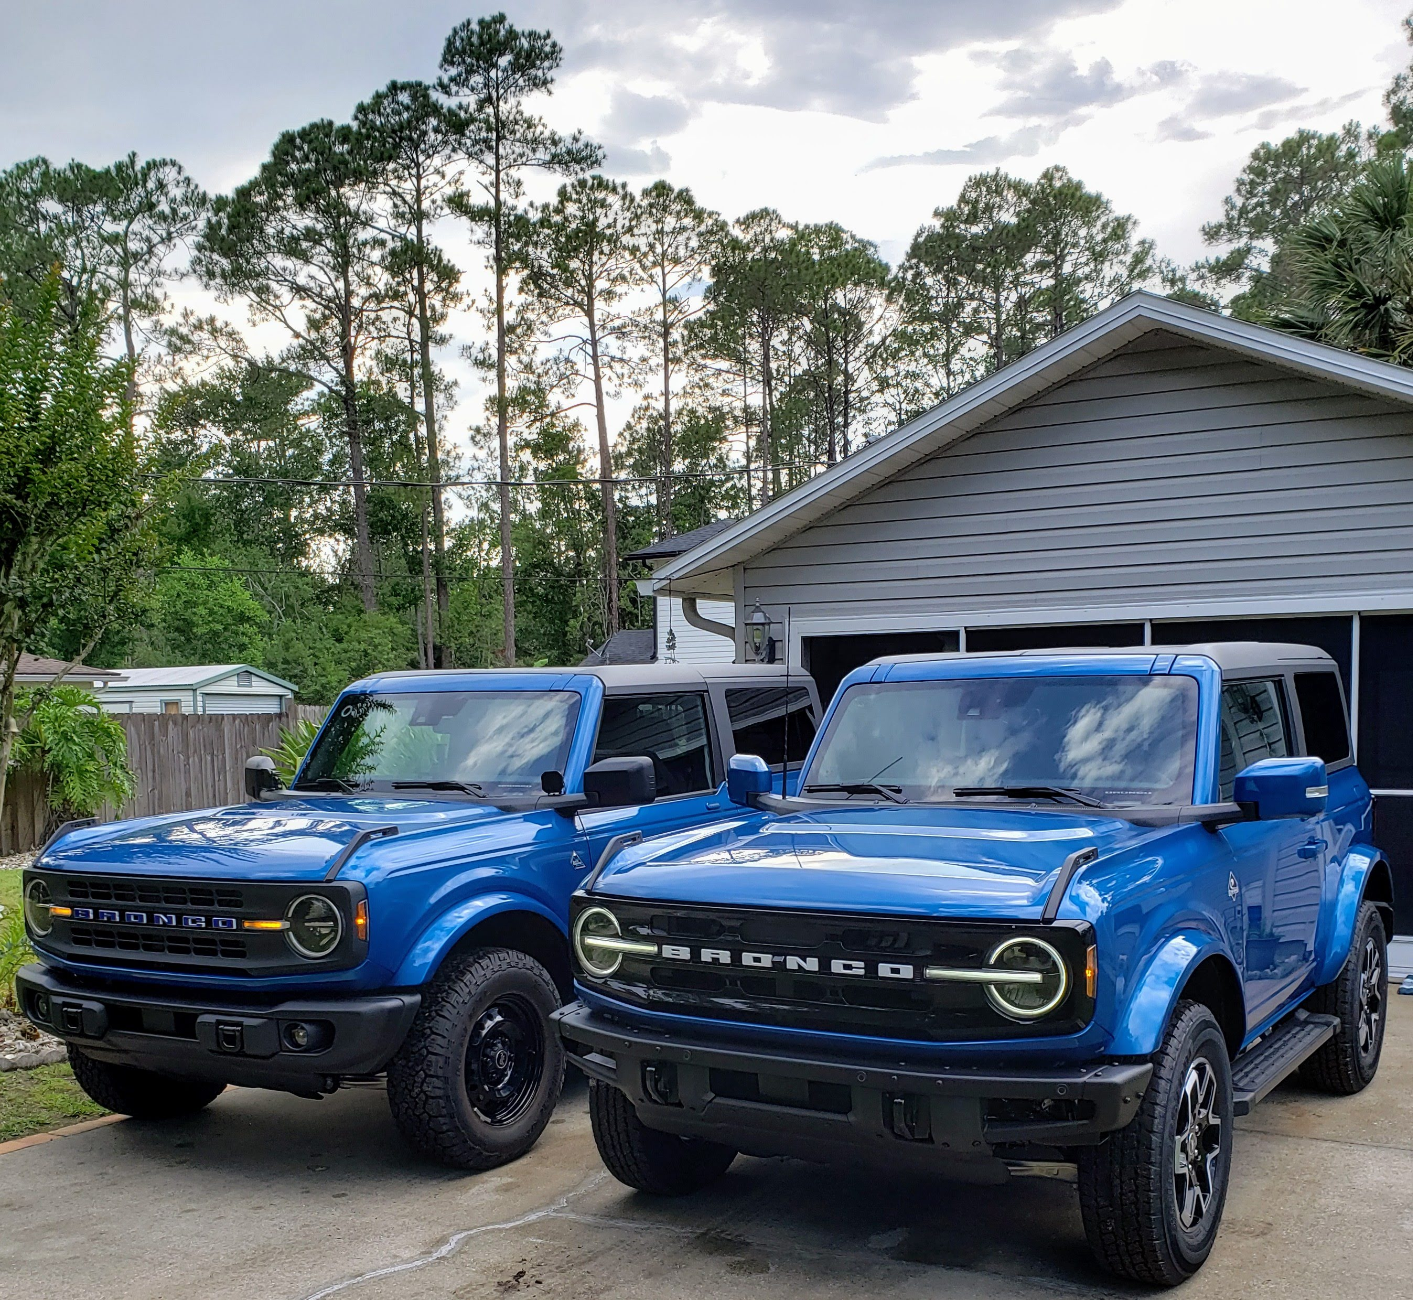 Ford Bronco The Official Bronco6G Photo Challenge Game 📸 🤳 Double Trouble (2)